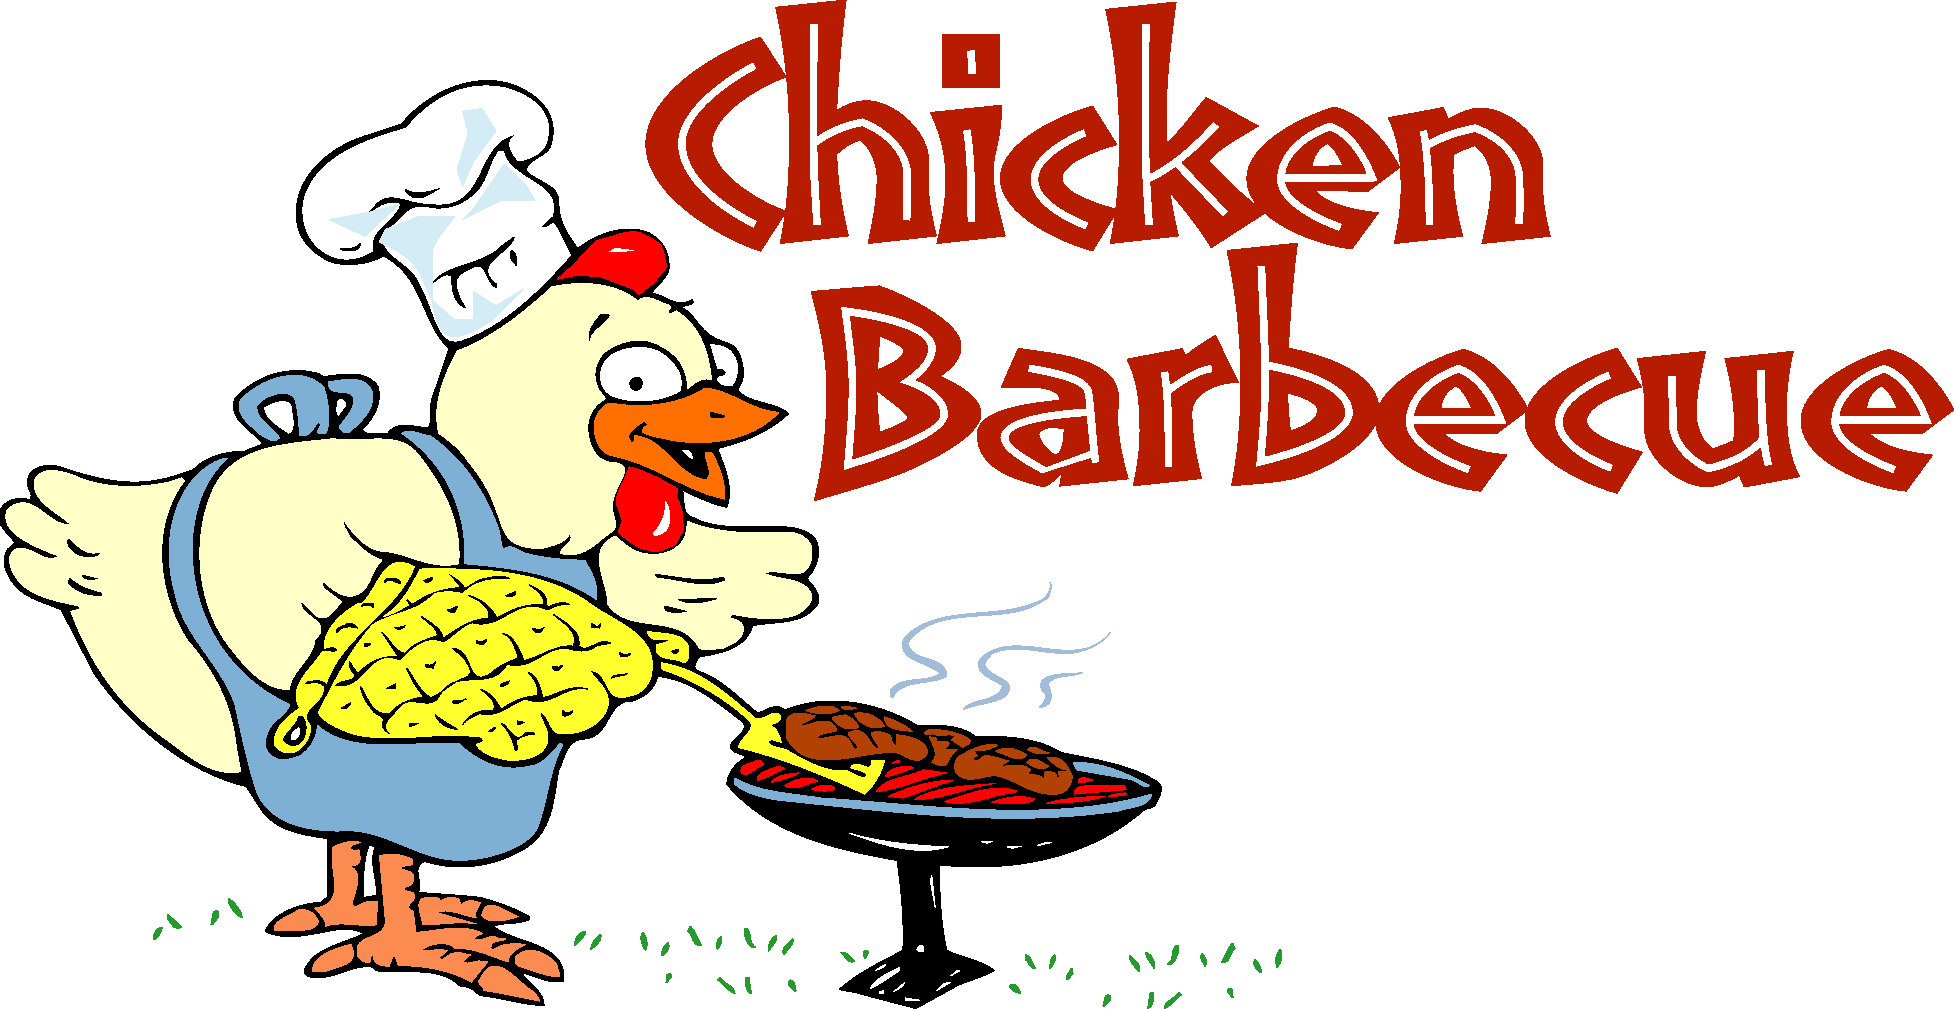 Bbq Chicken Dinner Clip Art Images & Pictures - Becuo